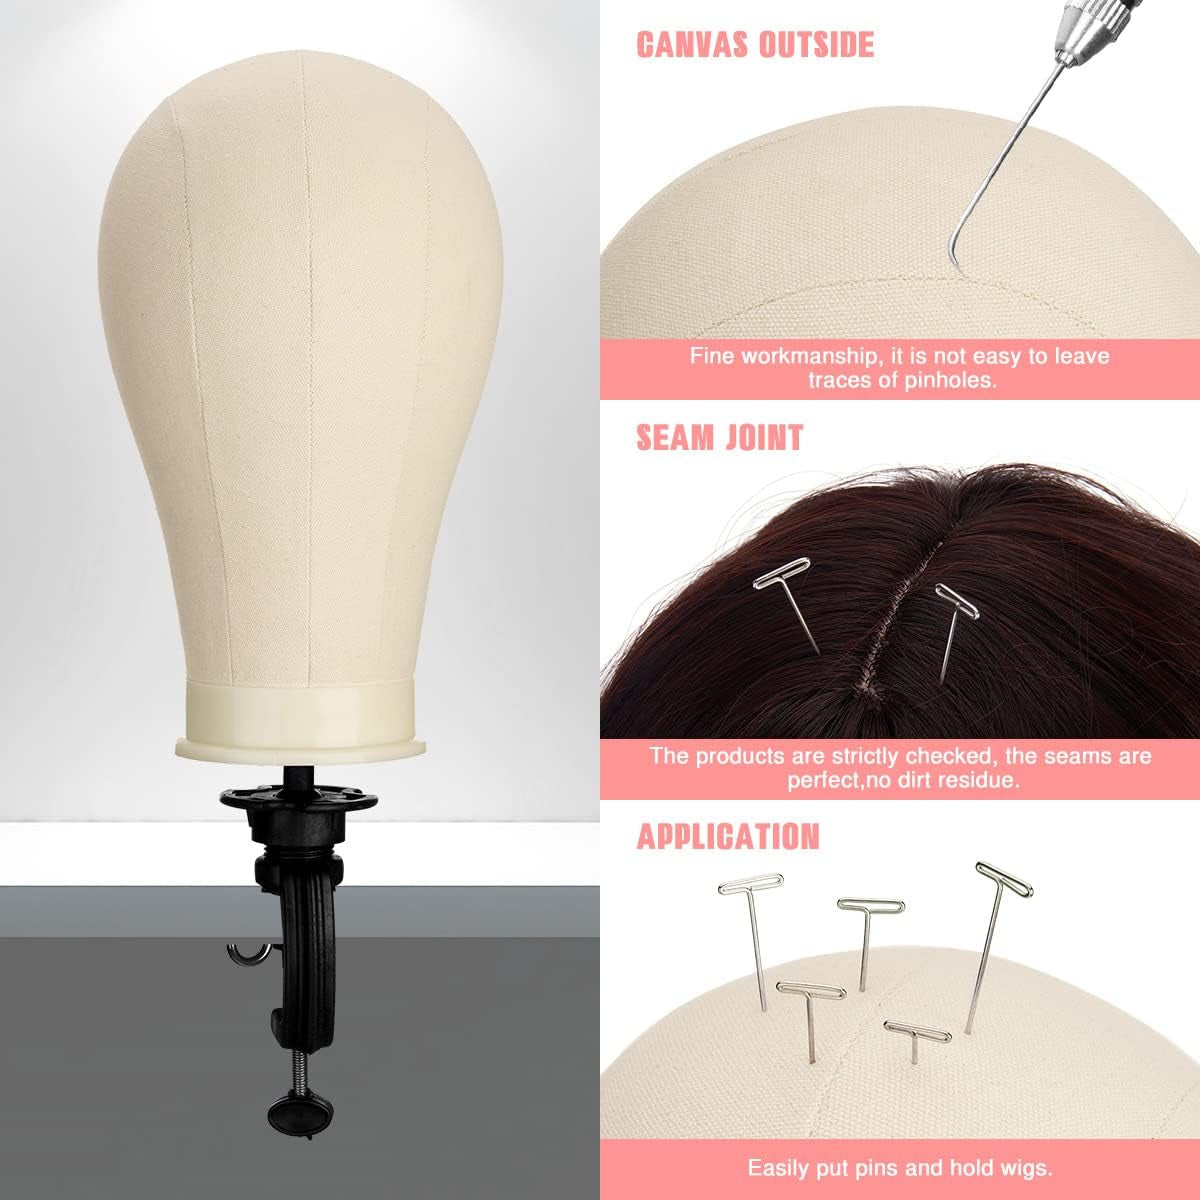 22 Inch Canvas Block Head Mannequin Wig Head, Wig Stand Tripod with Head, Mannequin Head Wig Display Styling Head, Manikin Block Head Set for Wigs Making Display with Wig Caps, T+C Pins Set&Brush